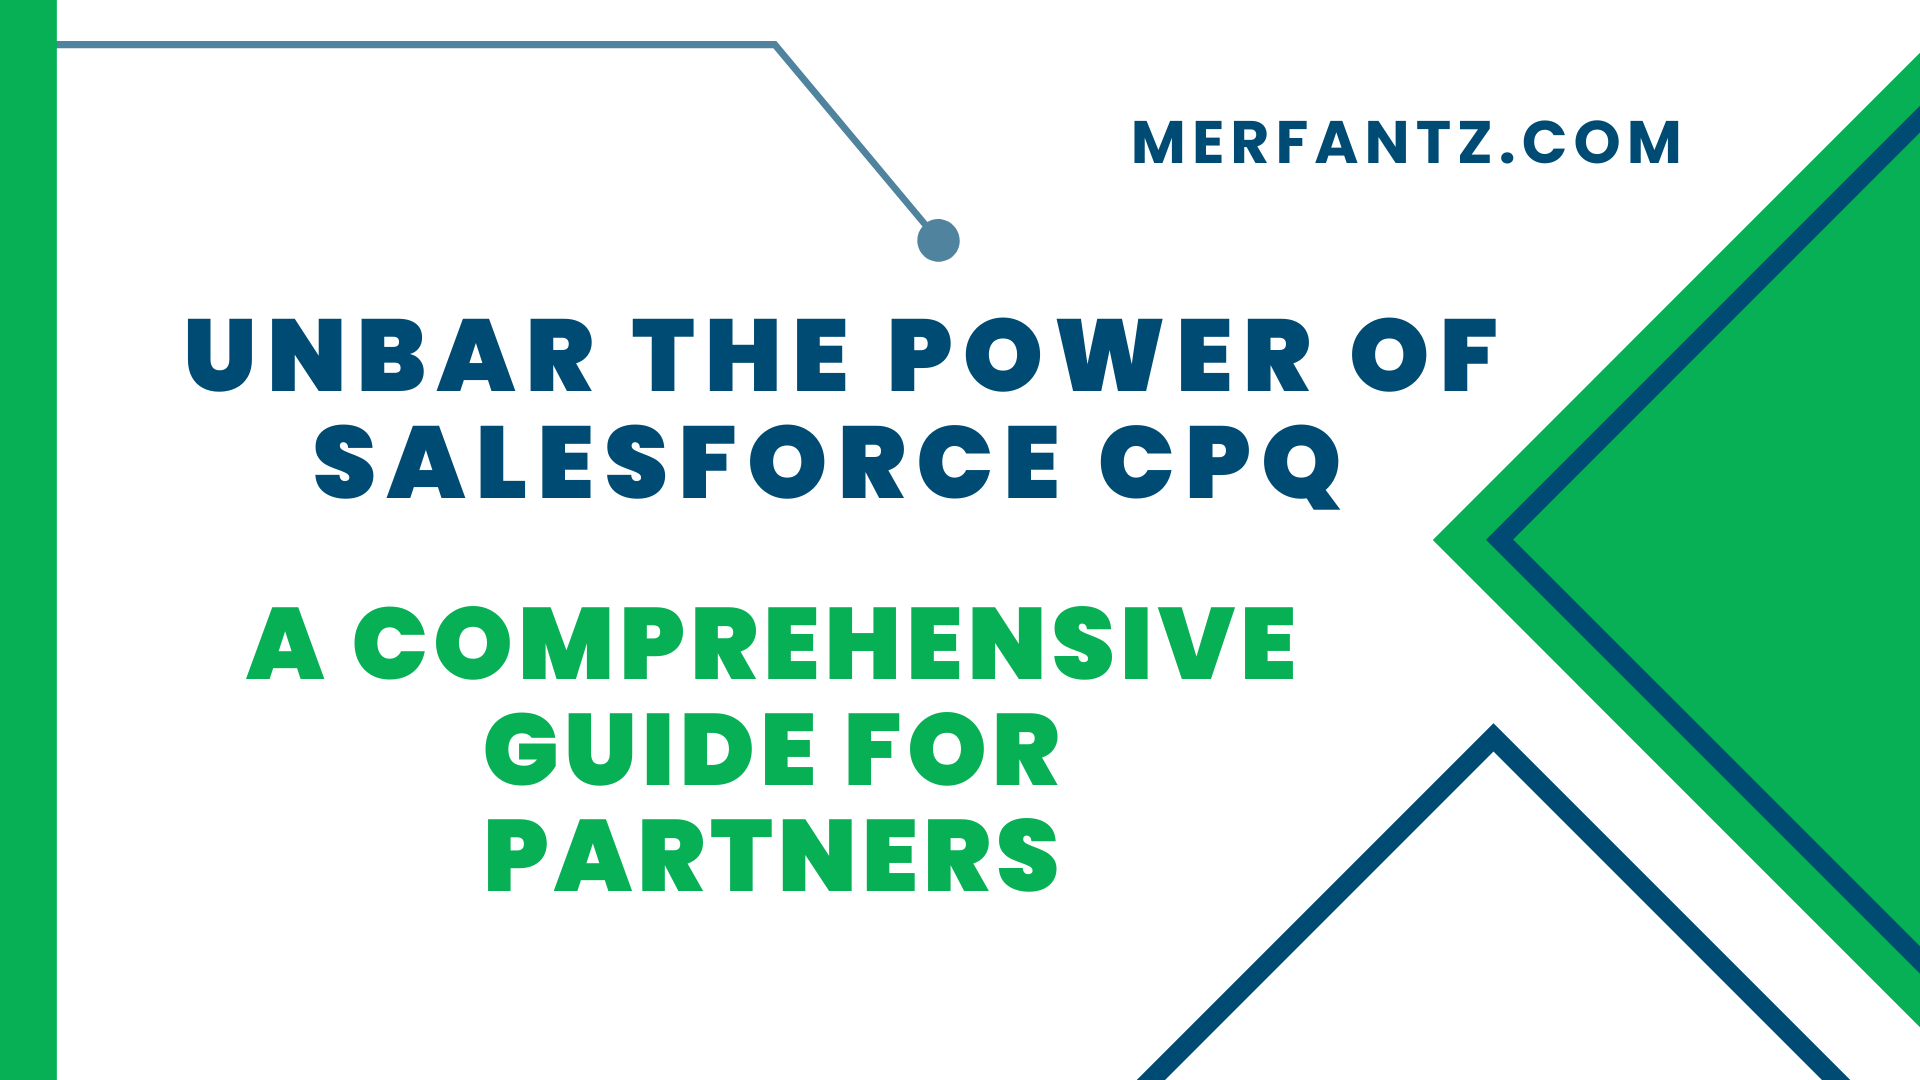 Unbar the Power of Salesforce CPQ A Comprehensive Guide for Partners